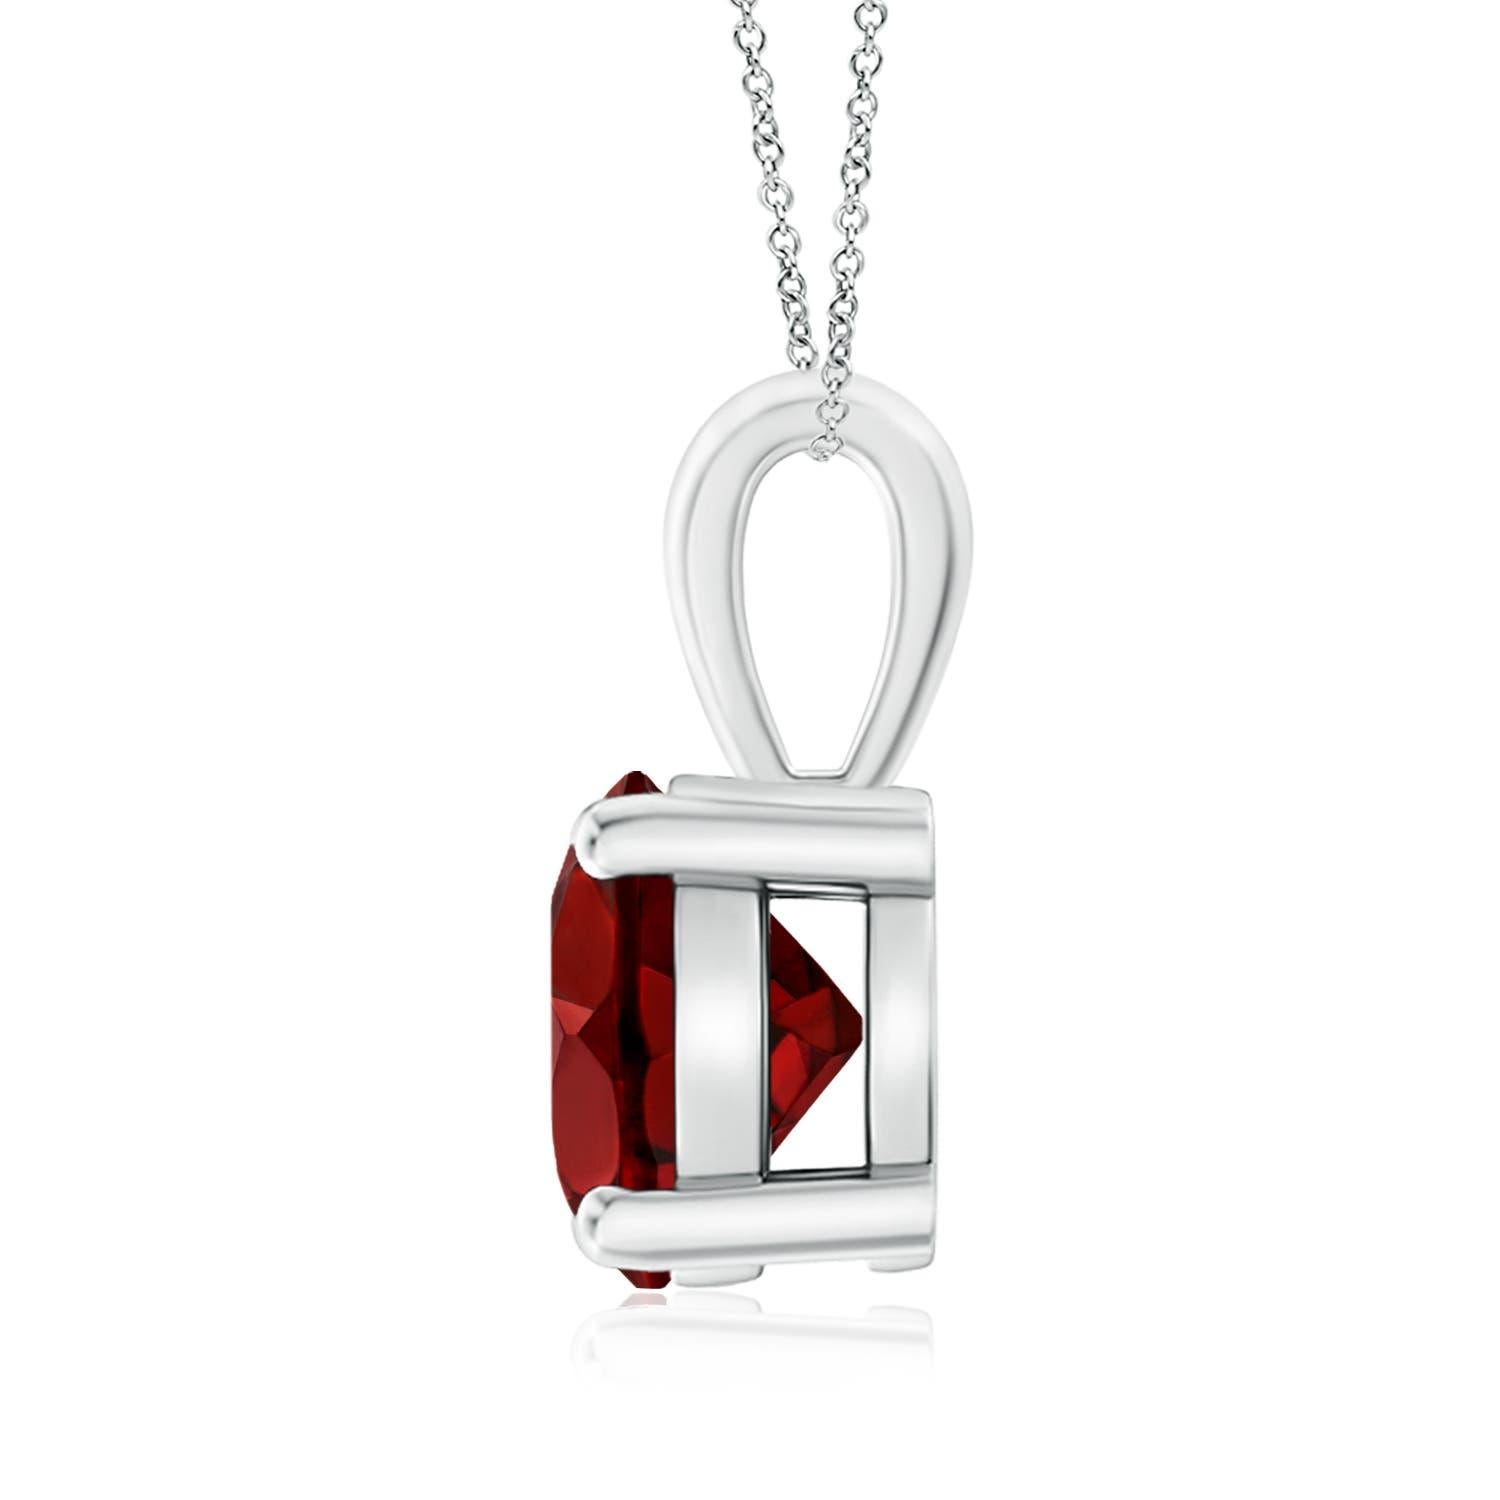 Linked to a single bale is a sparkling garnet secured in a four prong setting. This solitaire garnet pendant has a simple design and draws all the attention towards its deep red hue. It is crafted in 14k white gold.
Garnet is the Birthstone for